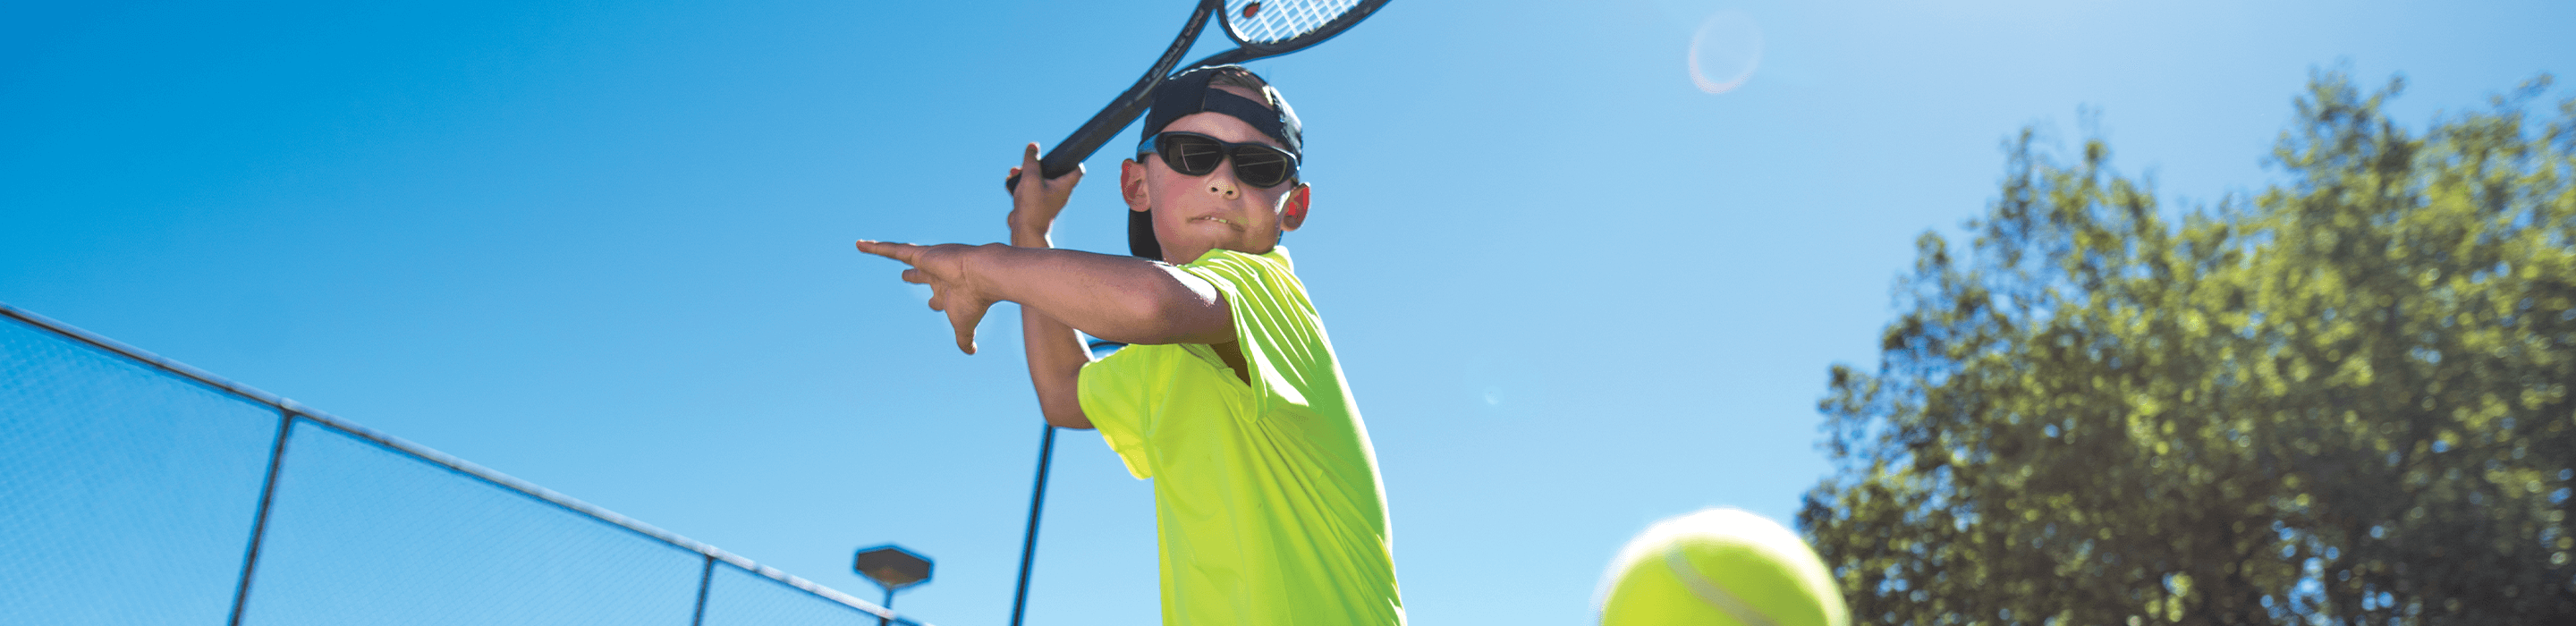 kid playing tennis and wearing sunglasses